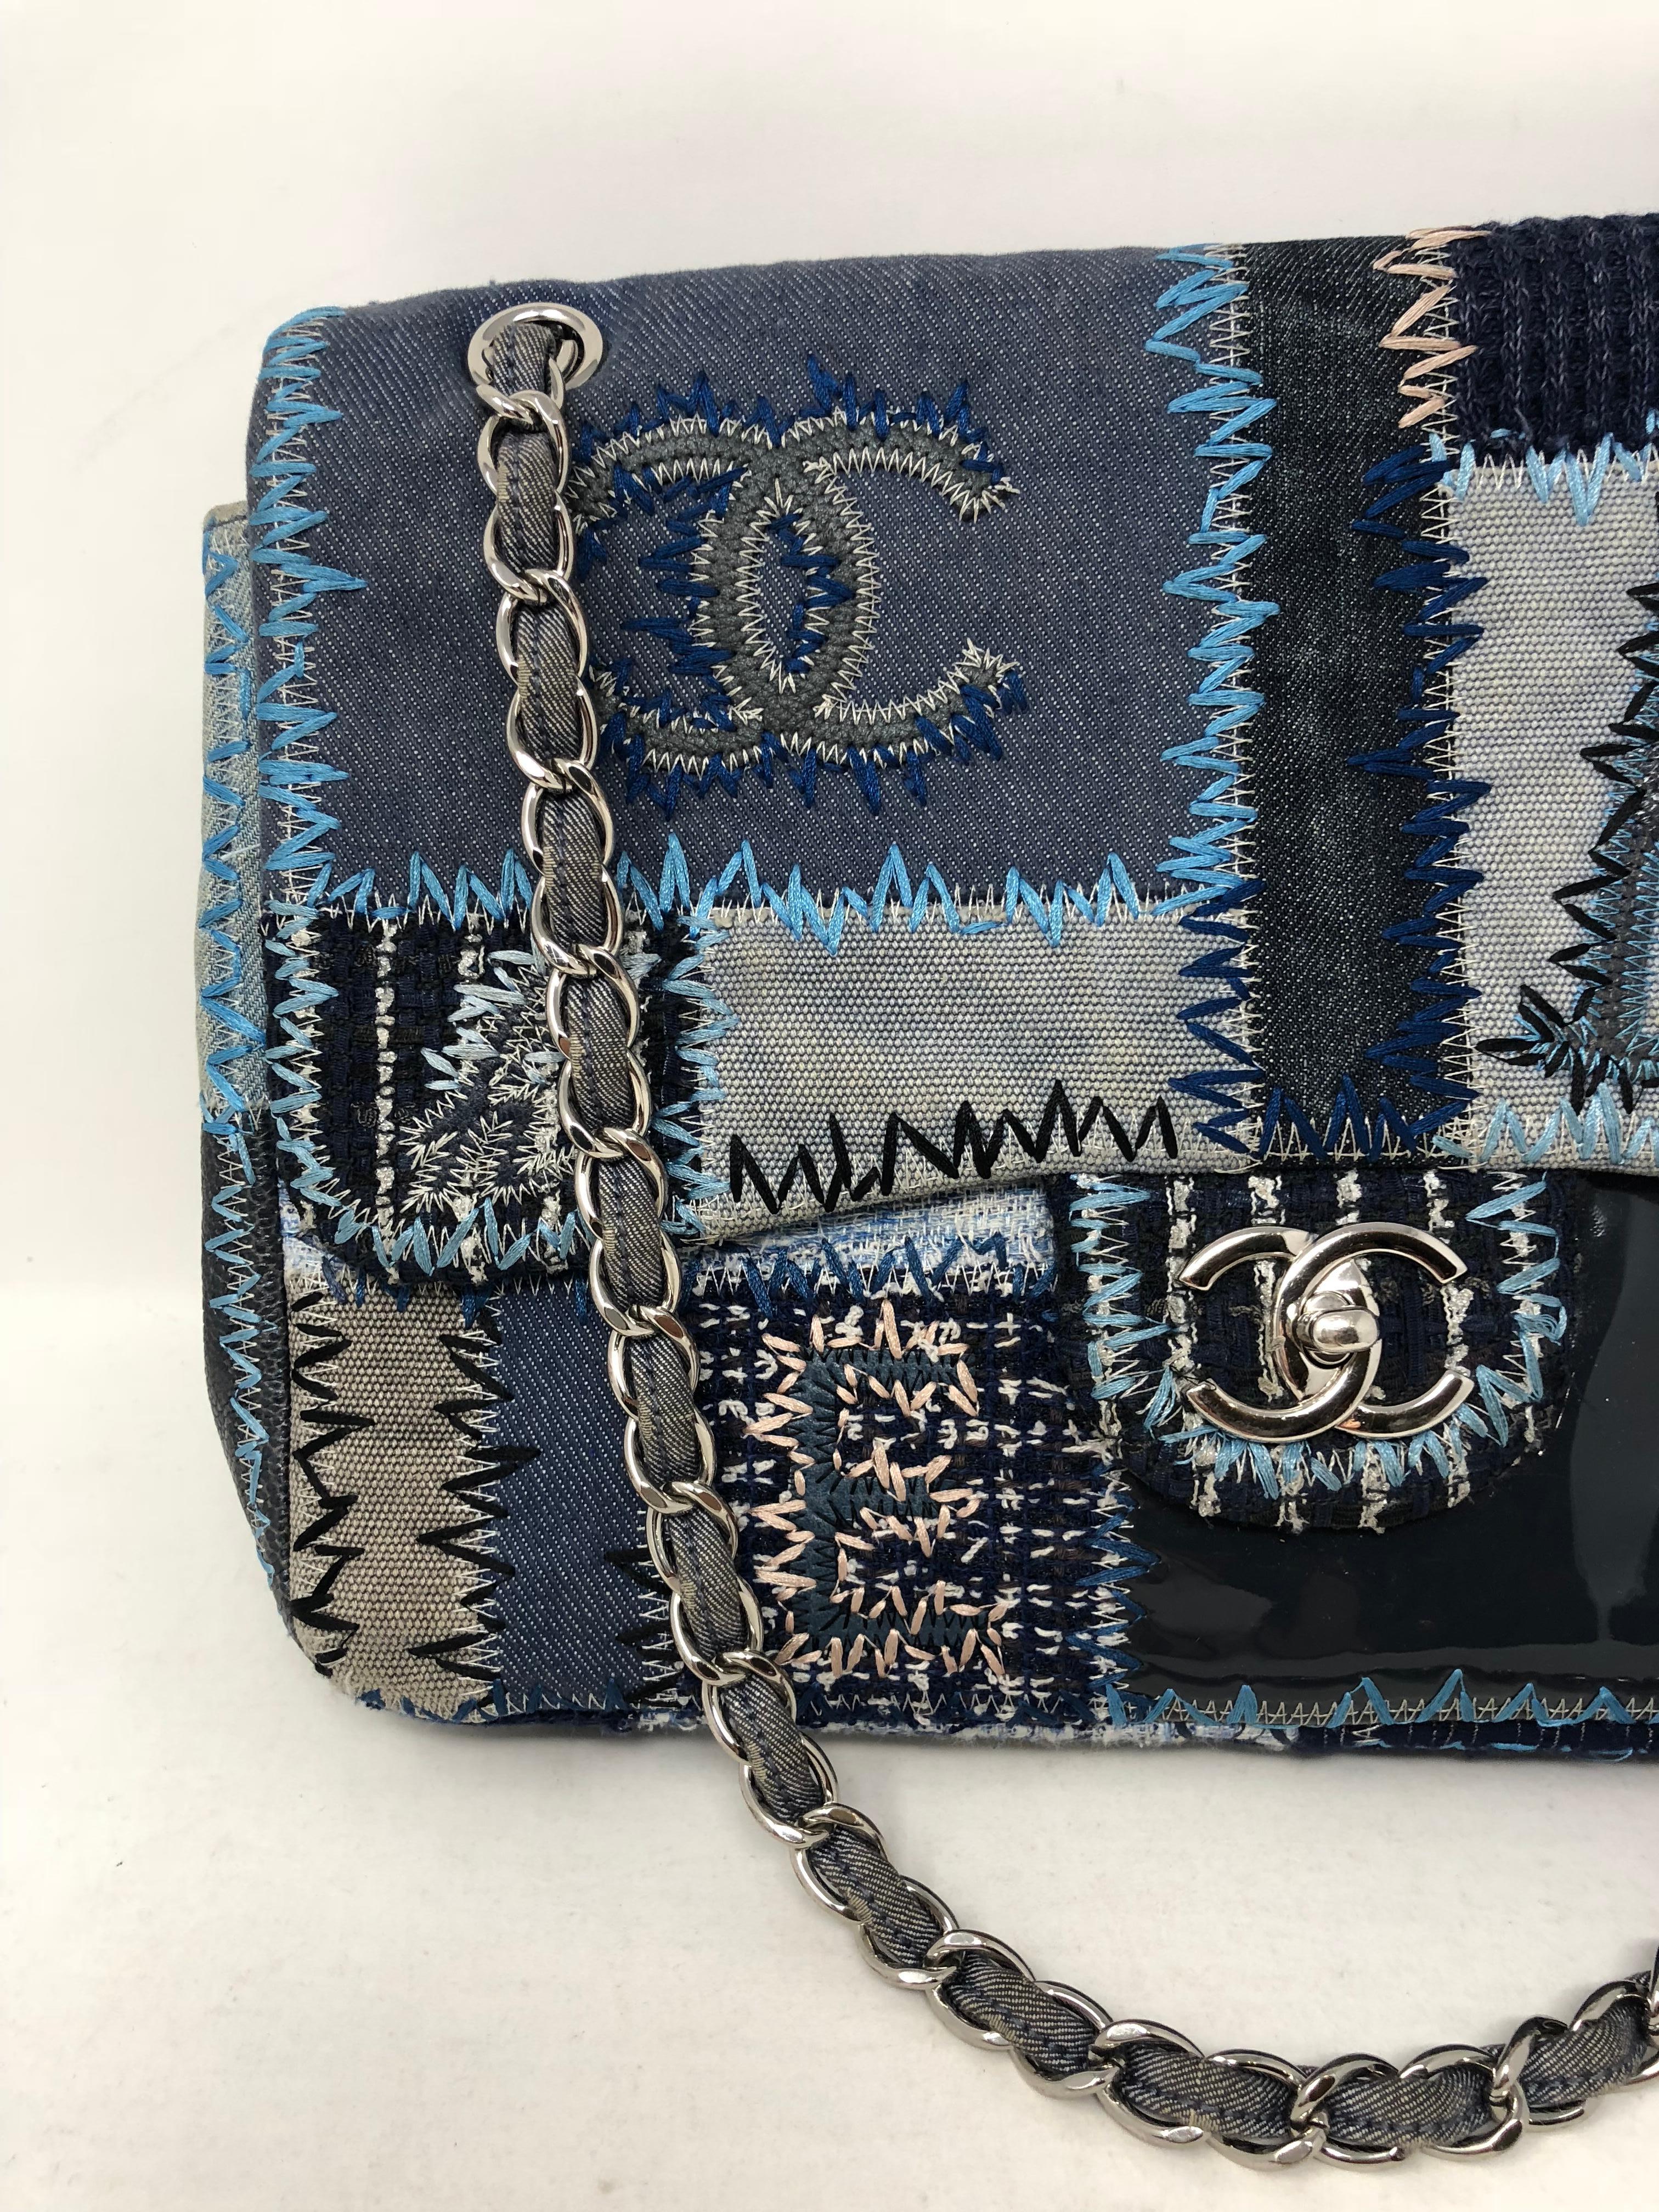 Chanel Denim Patchwork Bag. Unique style with embroidered denim patches. Silver chain and hardware. From a Collector's closet. Good condition. Soft denim makes this bag feel lighter than leather.  Guaranteed authentic. 